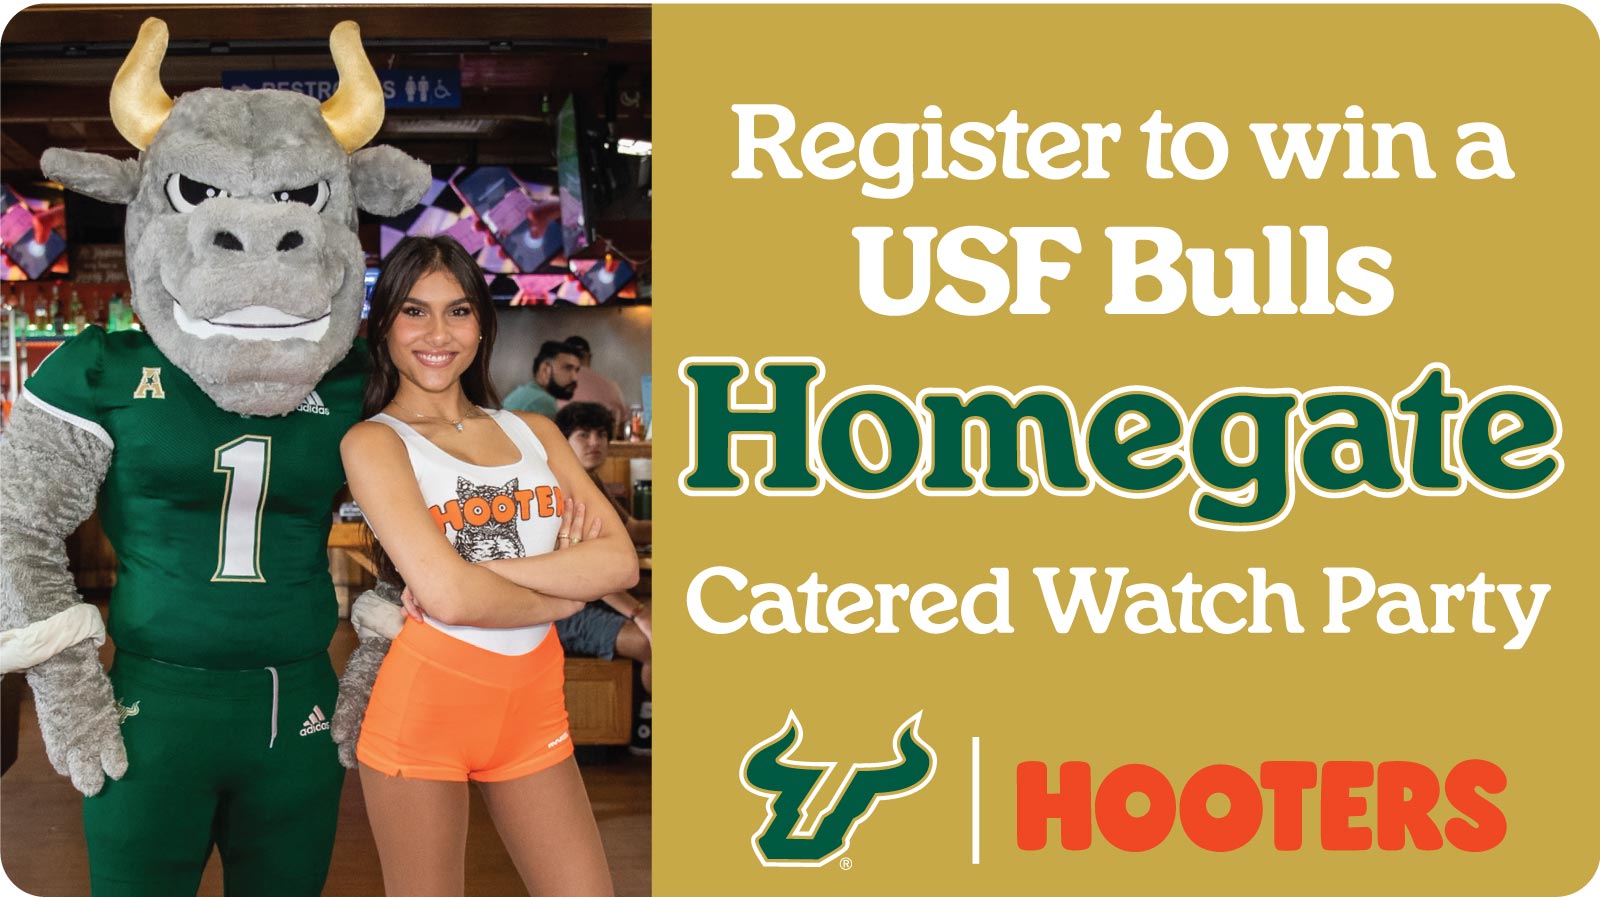 Register to win a USF Bulls Homegate Hooters Catered Watch Party